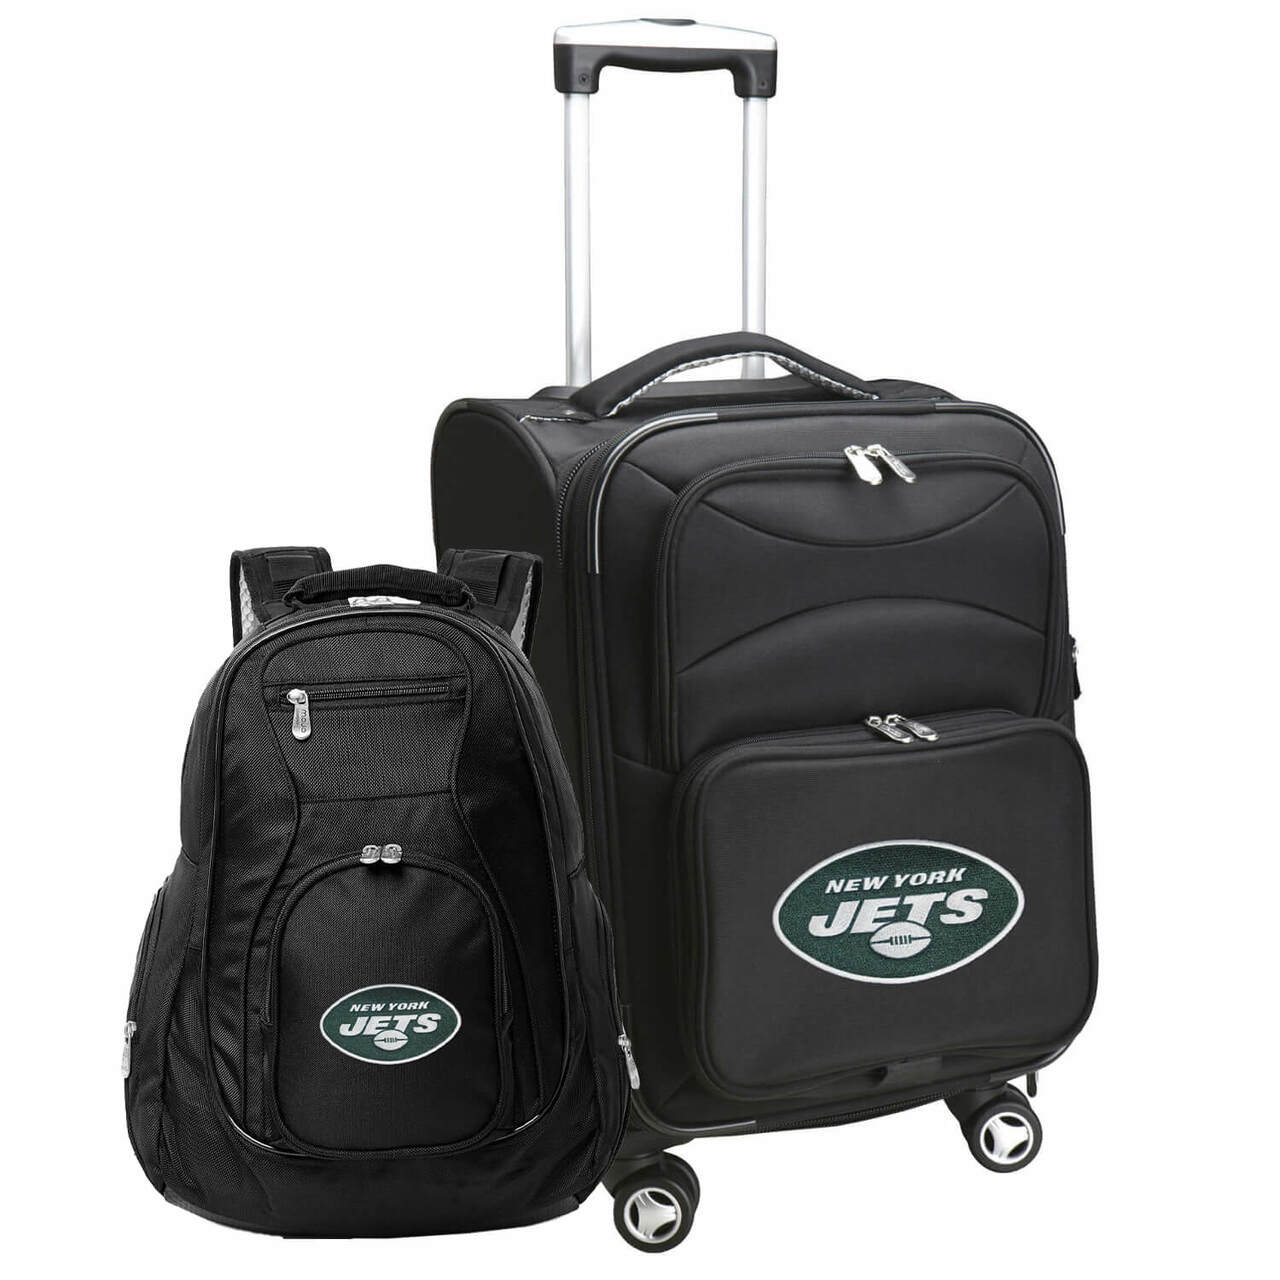 New York Jets Spinner Carry-On Luggage and Backpack Set